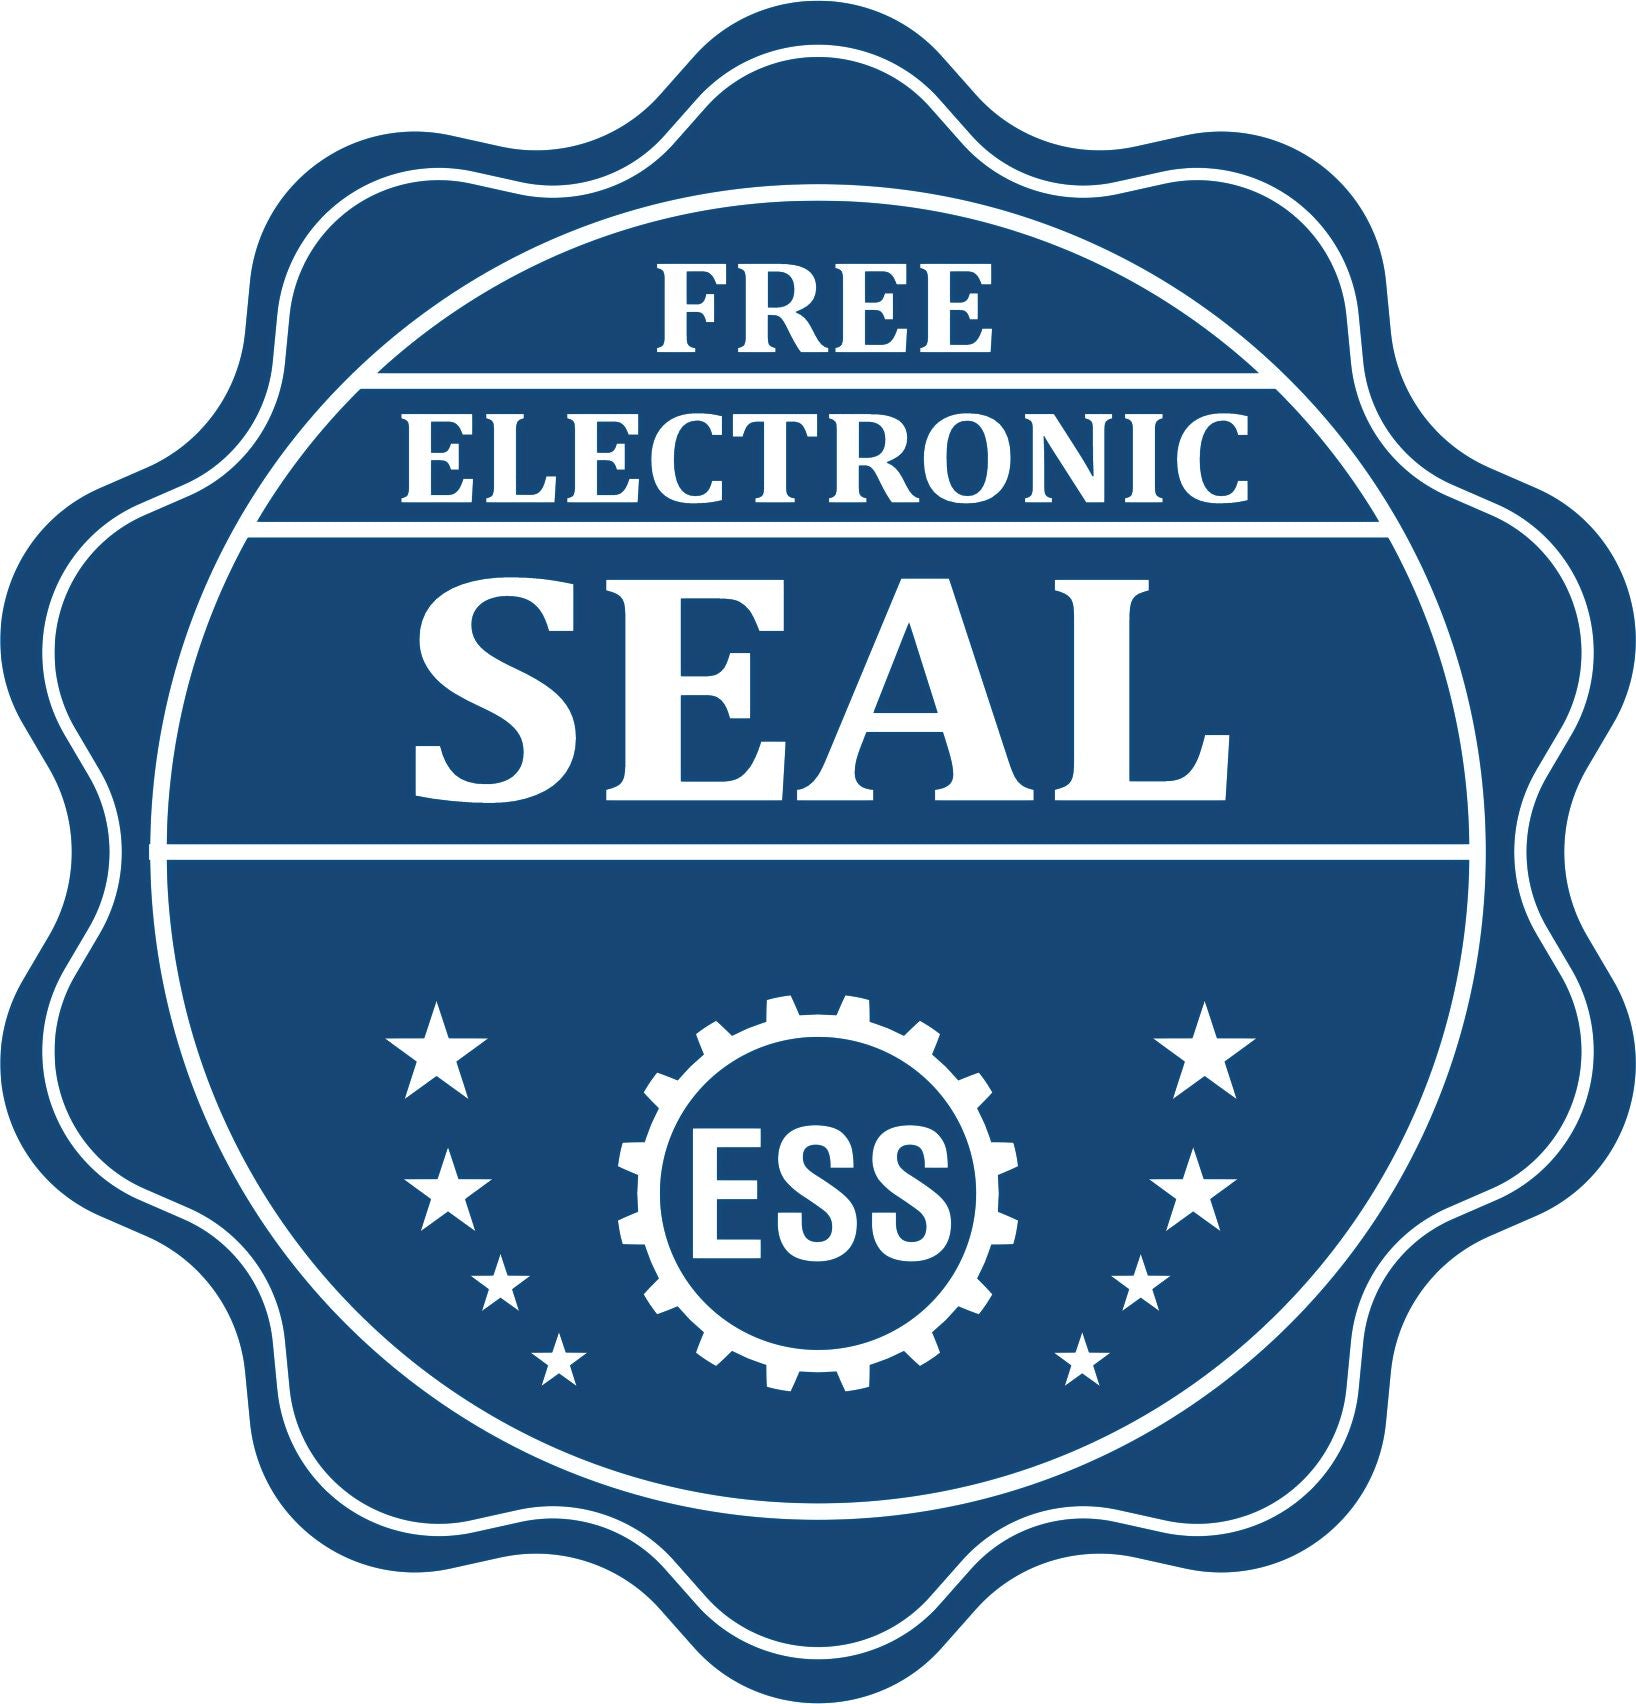 A badge showing a free electronic seal for the Heavy Duty Cast Iron Tennessee Geologist Seal Embosser with stars and the ESS gear on the emblem.